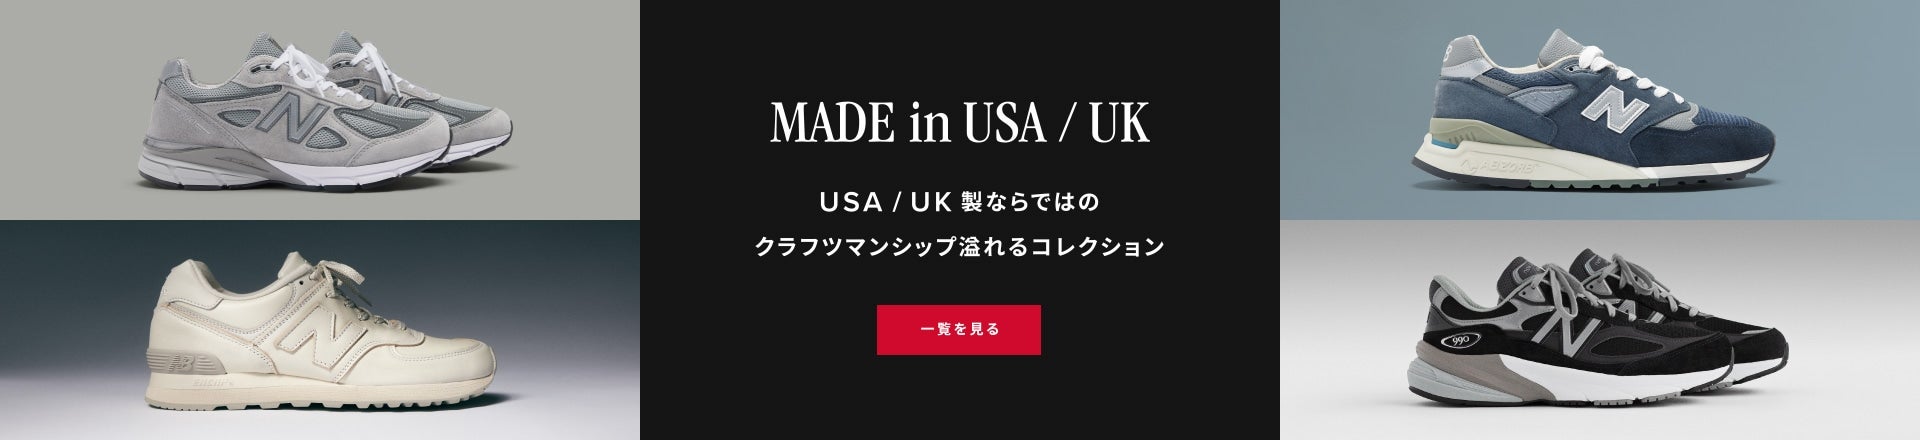 MADE in USA/UK